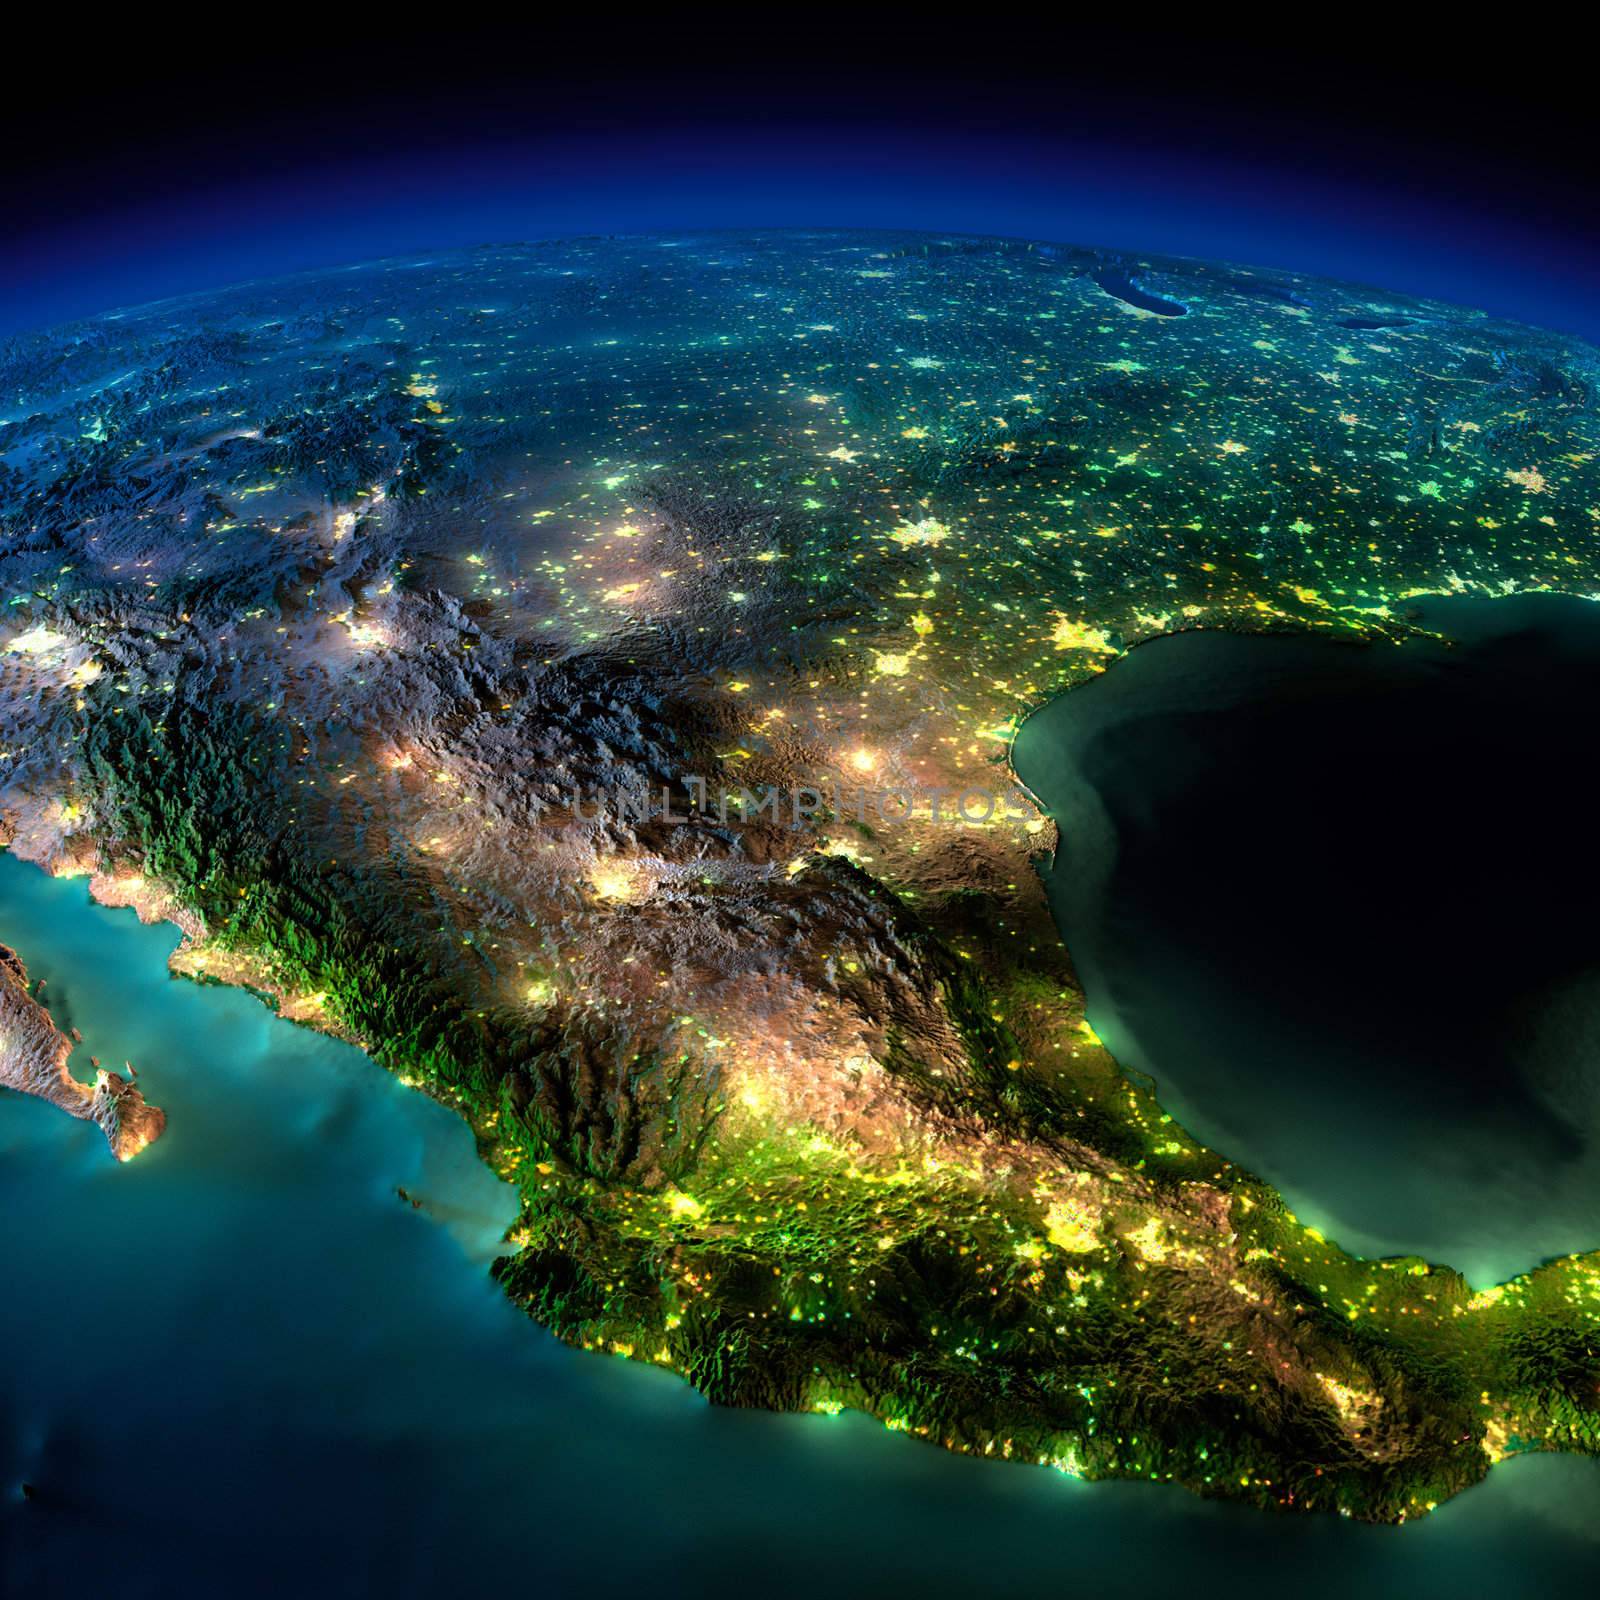 Night Earth. A piece of North America - Mexico by Antartis